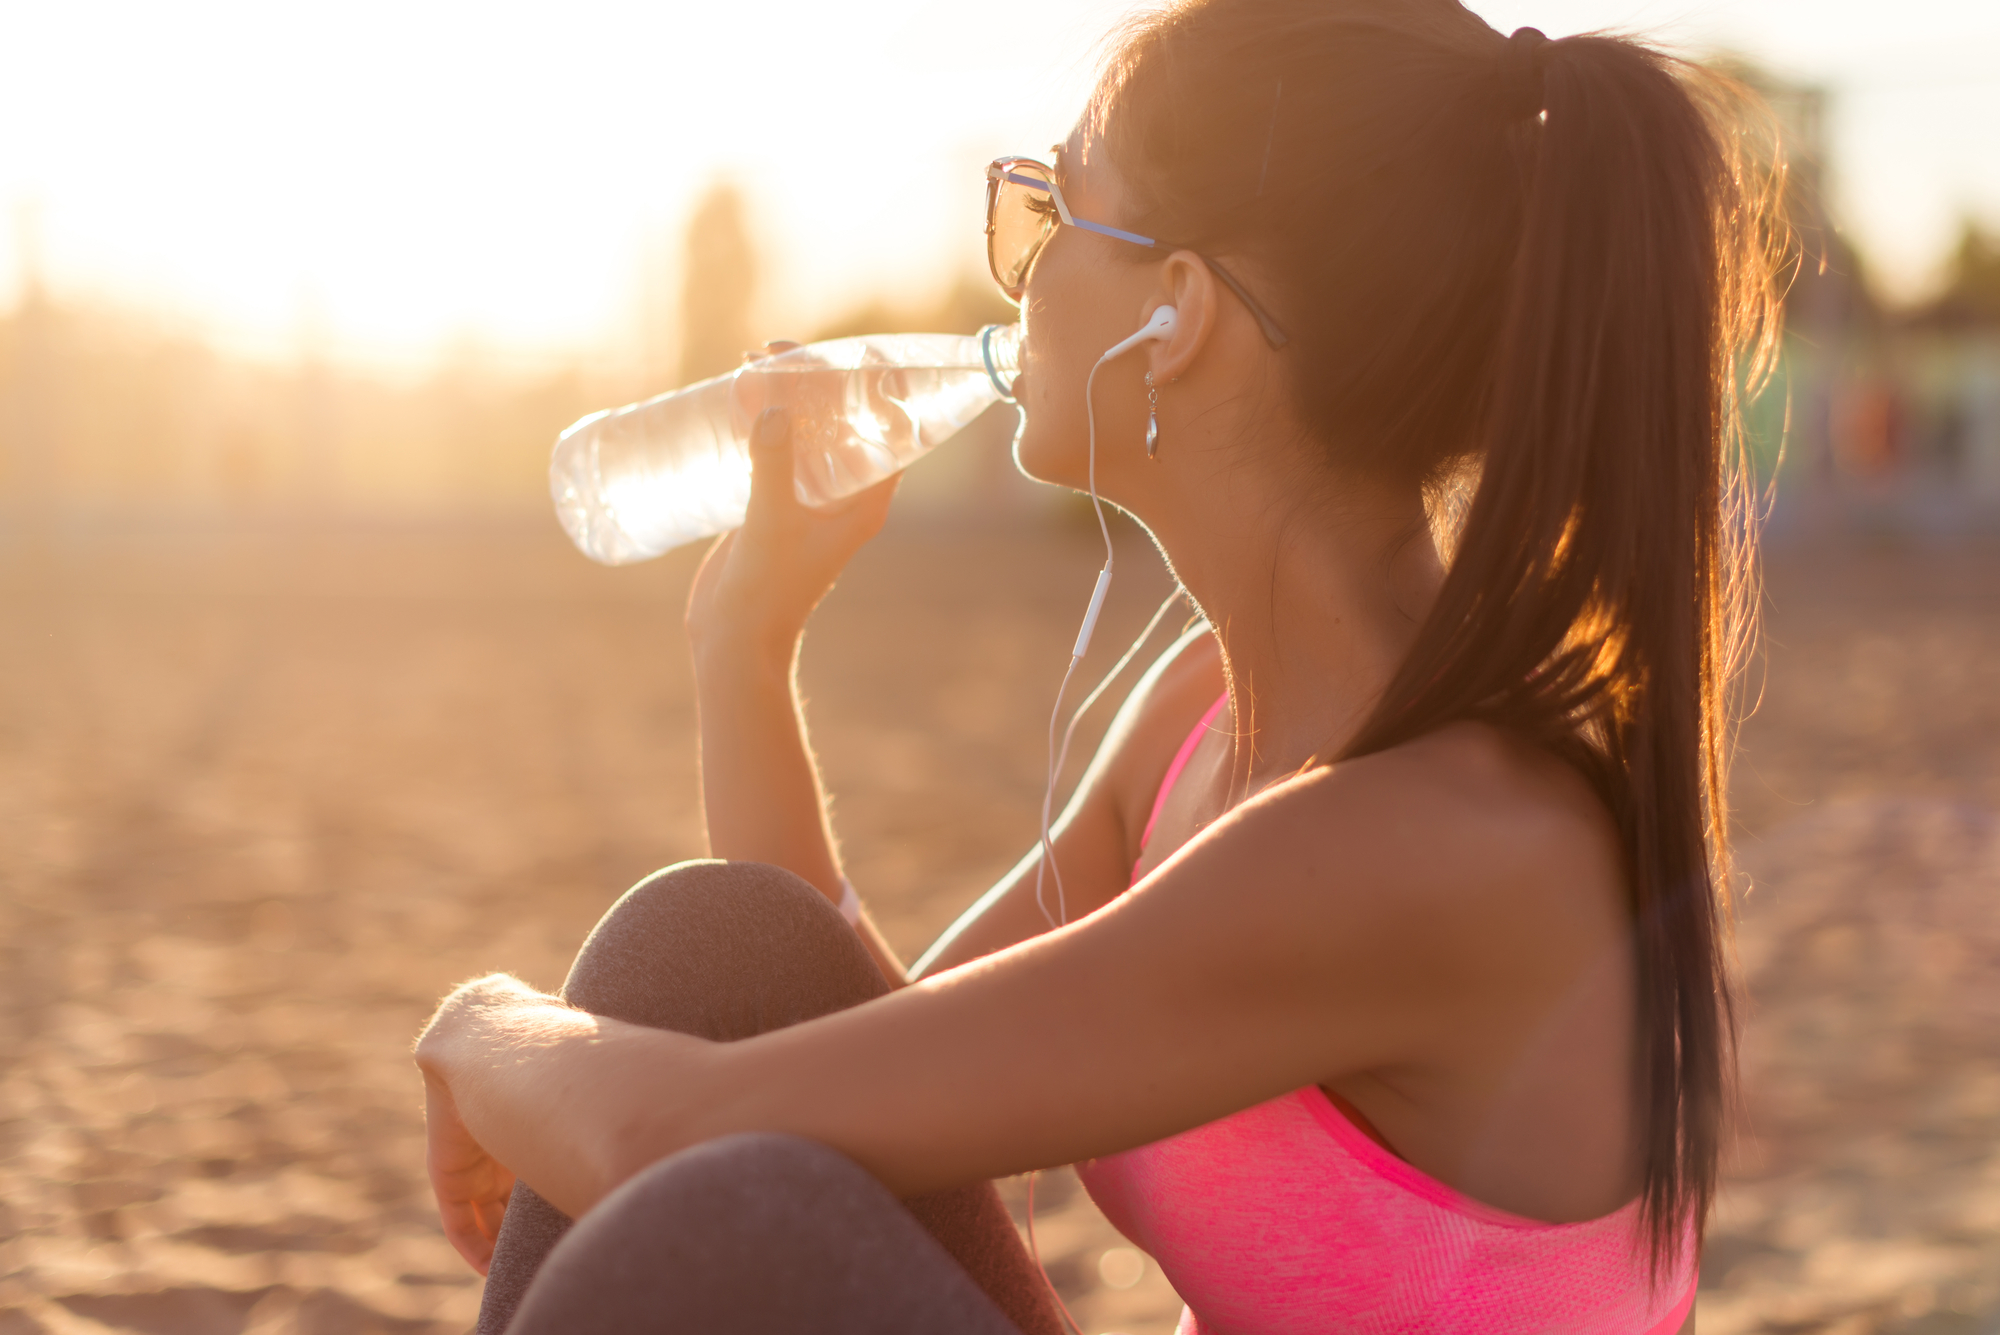 An individual in athletic apparel sitting in the sand at the beach at sunset, listening to music through earbuds and drinking bottled water.